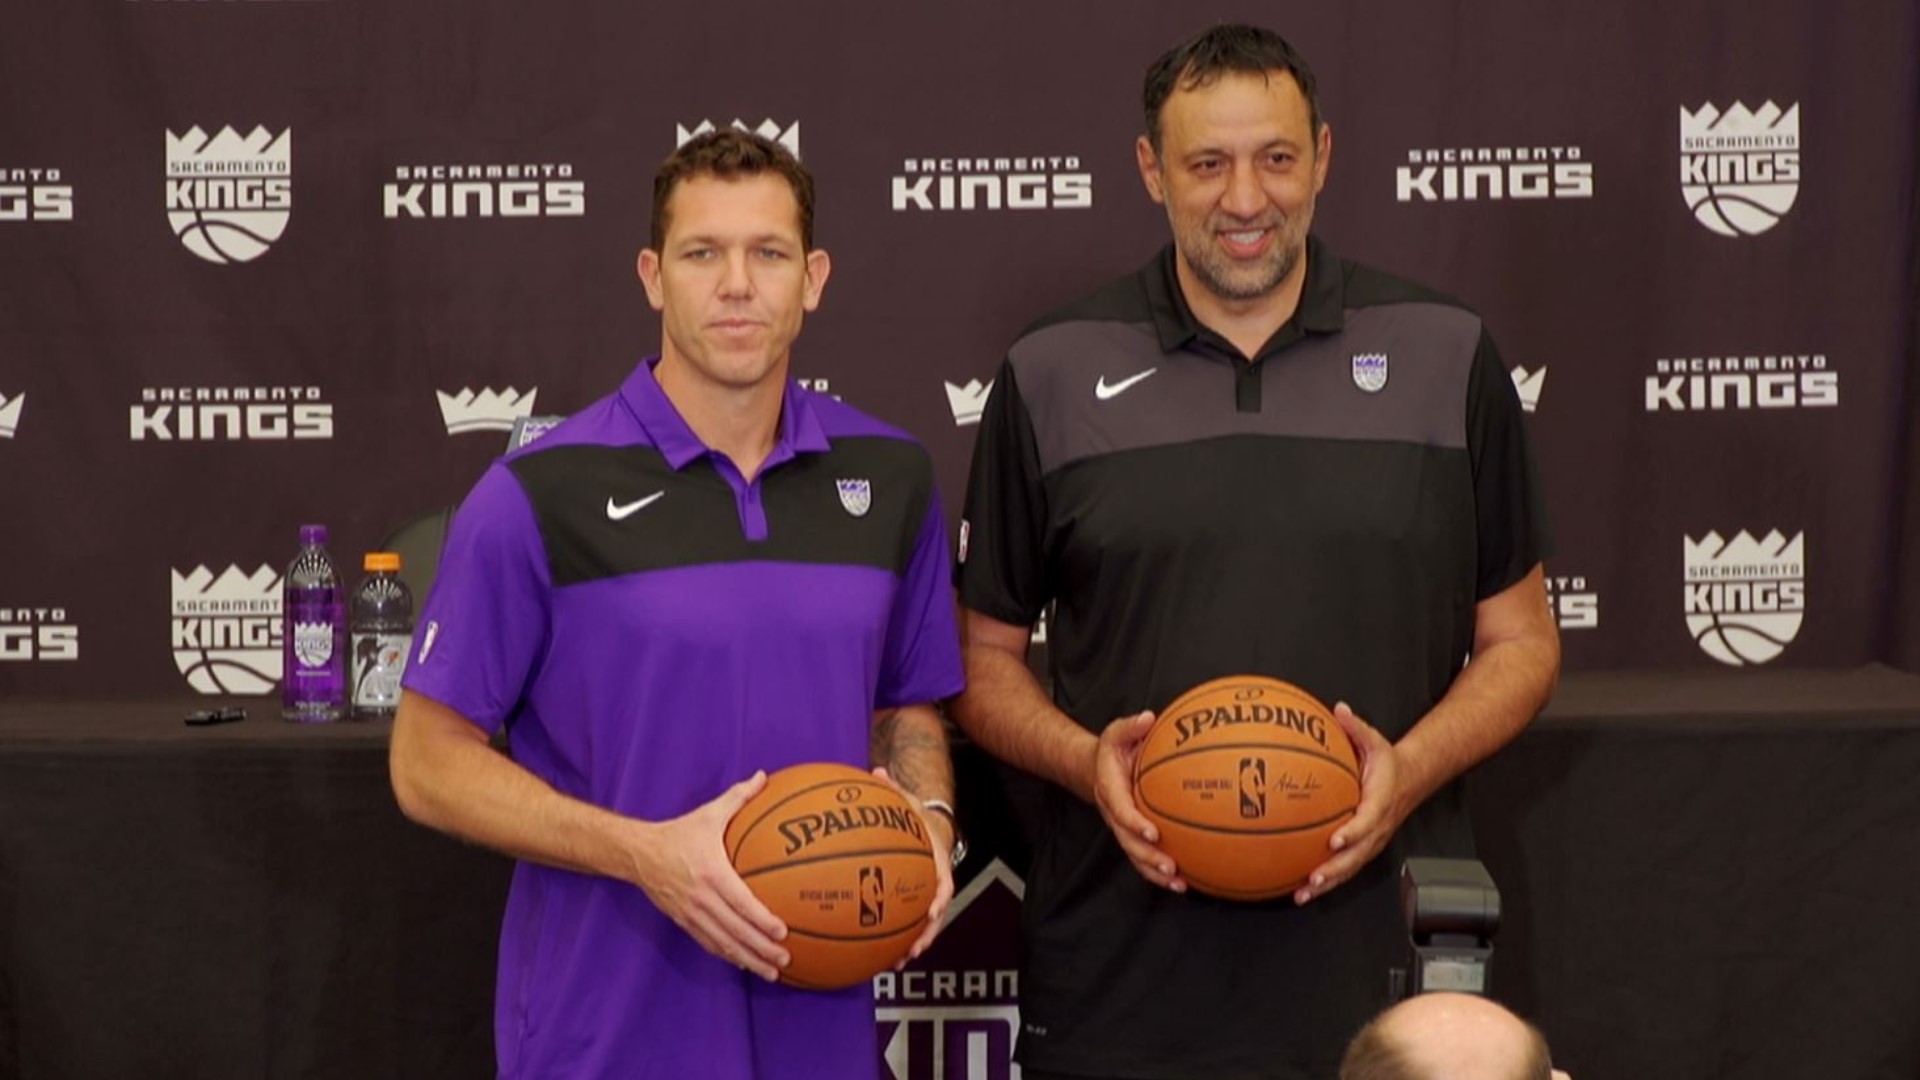 Kings’ general manager Vlade Divac introduces their new head coach Luke Walton to the local media inside the team’s practice facility on Monday. Walton talks about what makes Sacramento an appealing gig for him, stepping away from the Lakers after three seasons in Los Angeles and his coaching style.